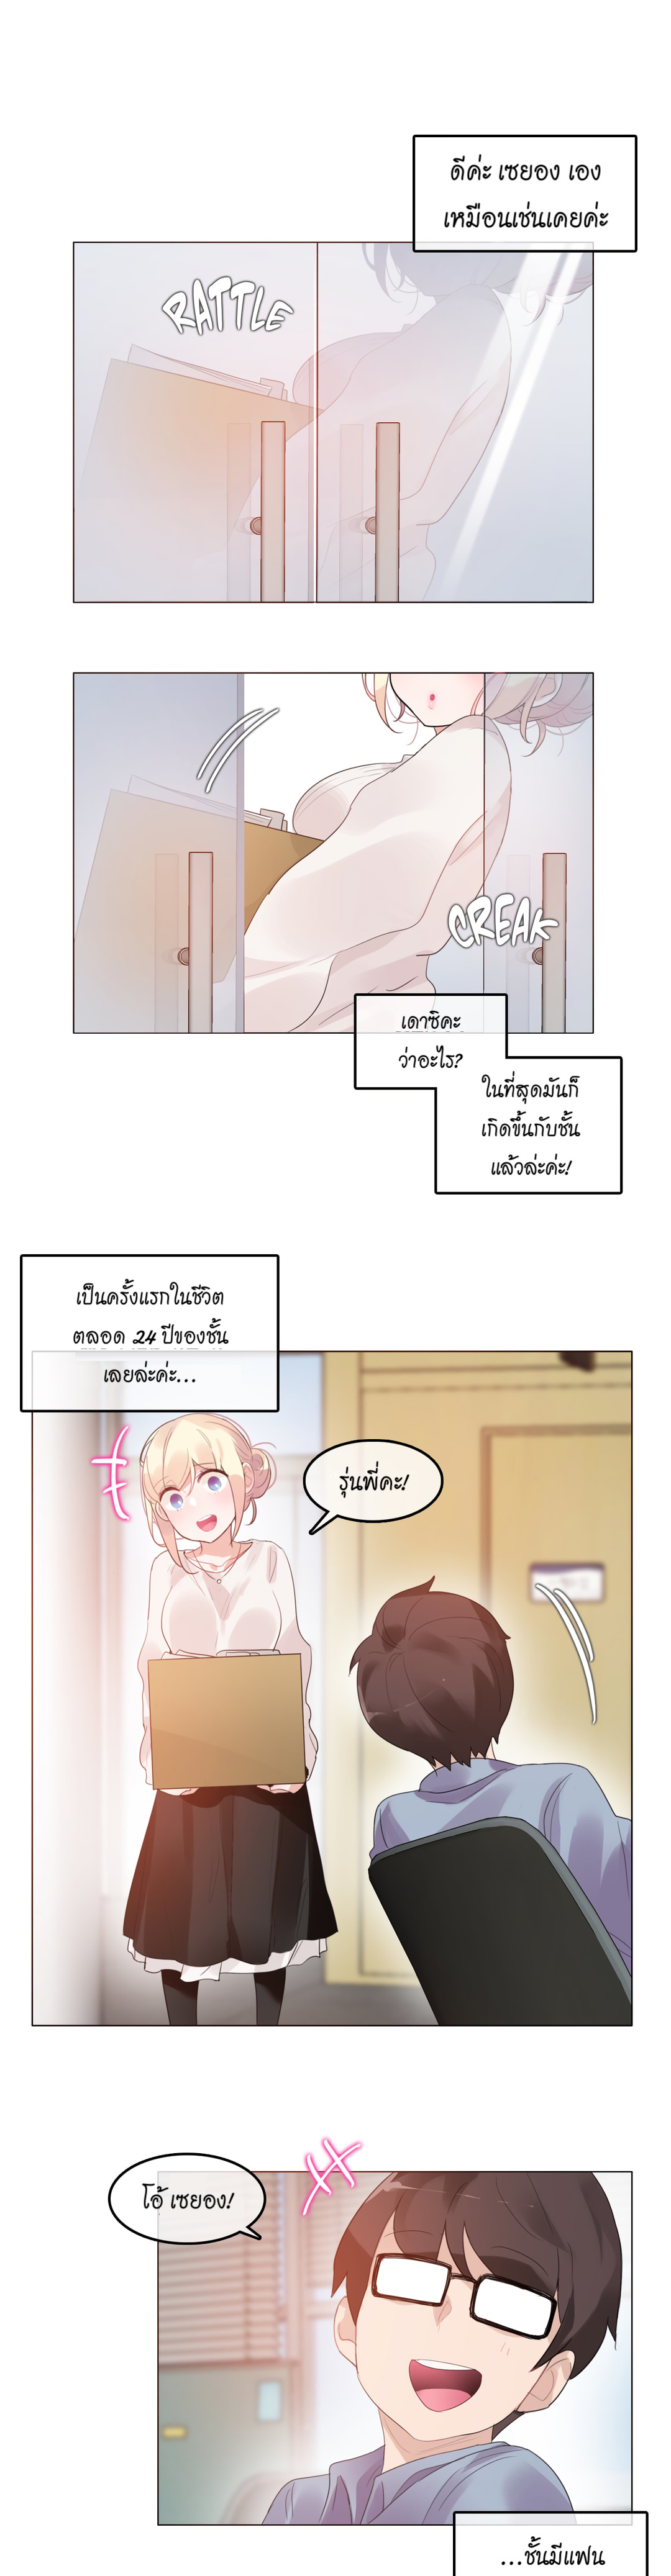 A Pervert’s Daily Life56 (1)